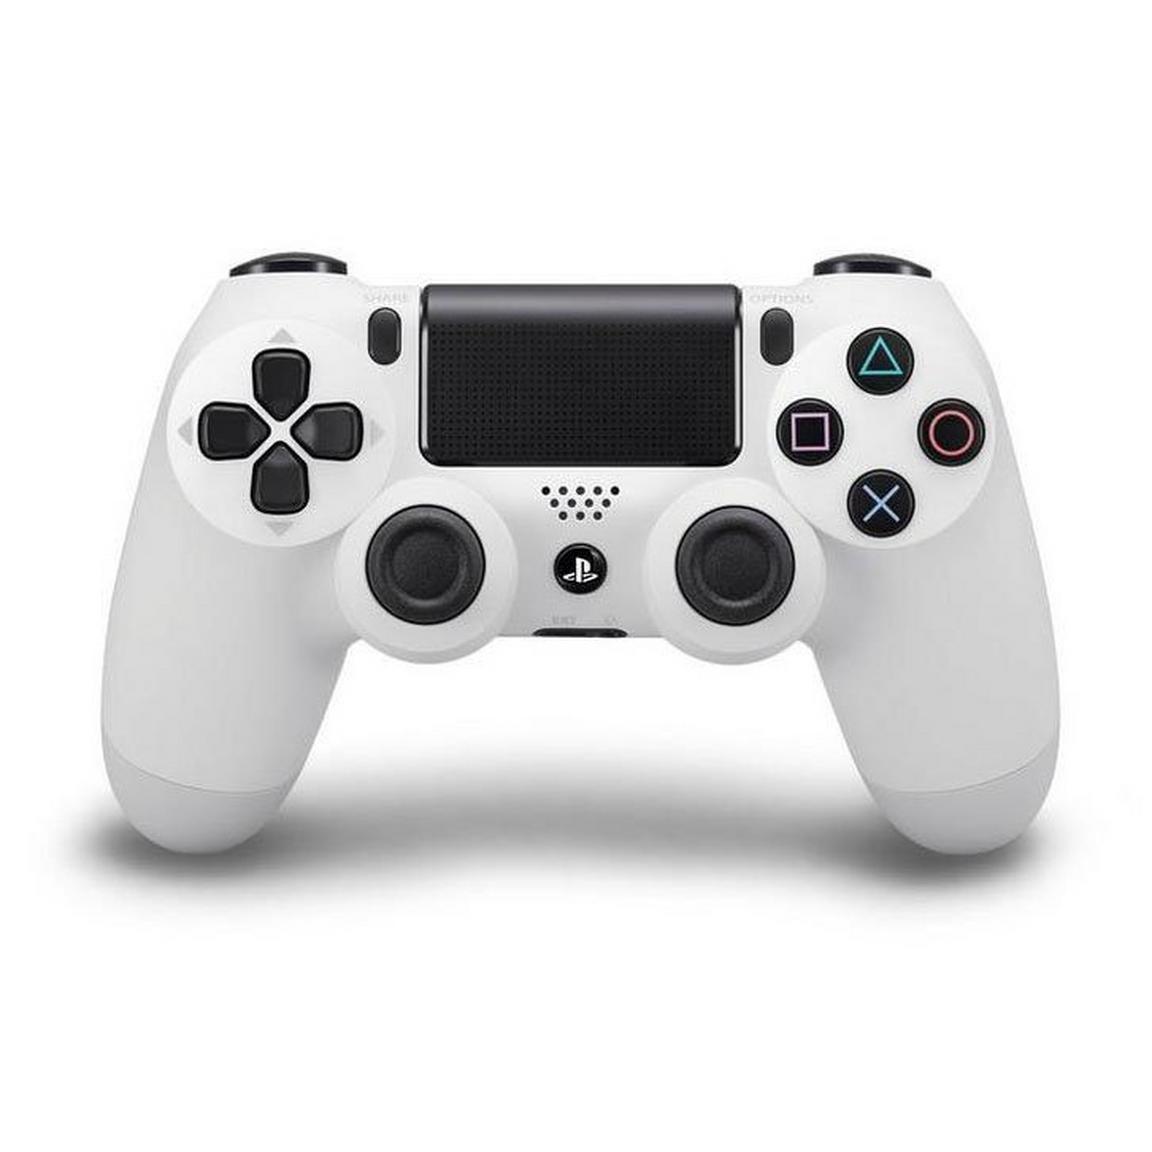 Sony-DUALSHOCK-4-Wireless-Controller-for-PlayStation-4-glacier-white